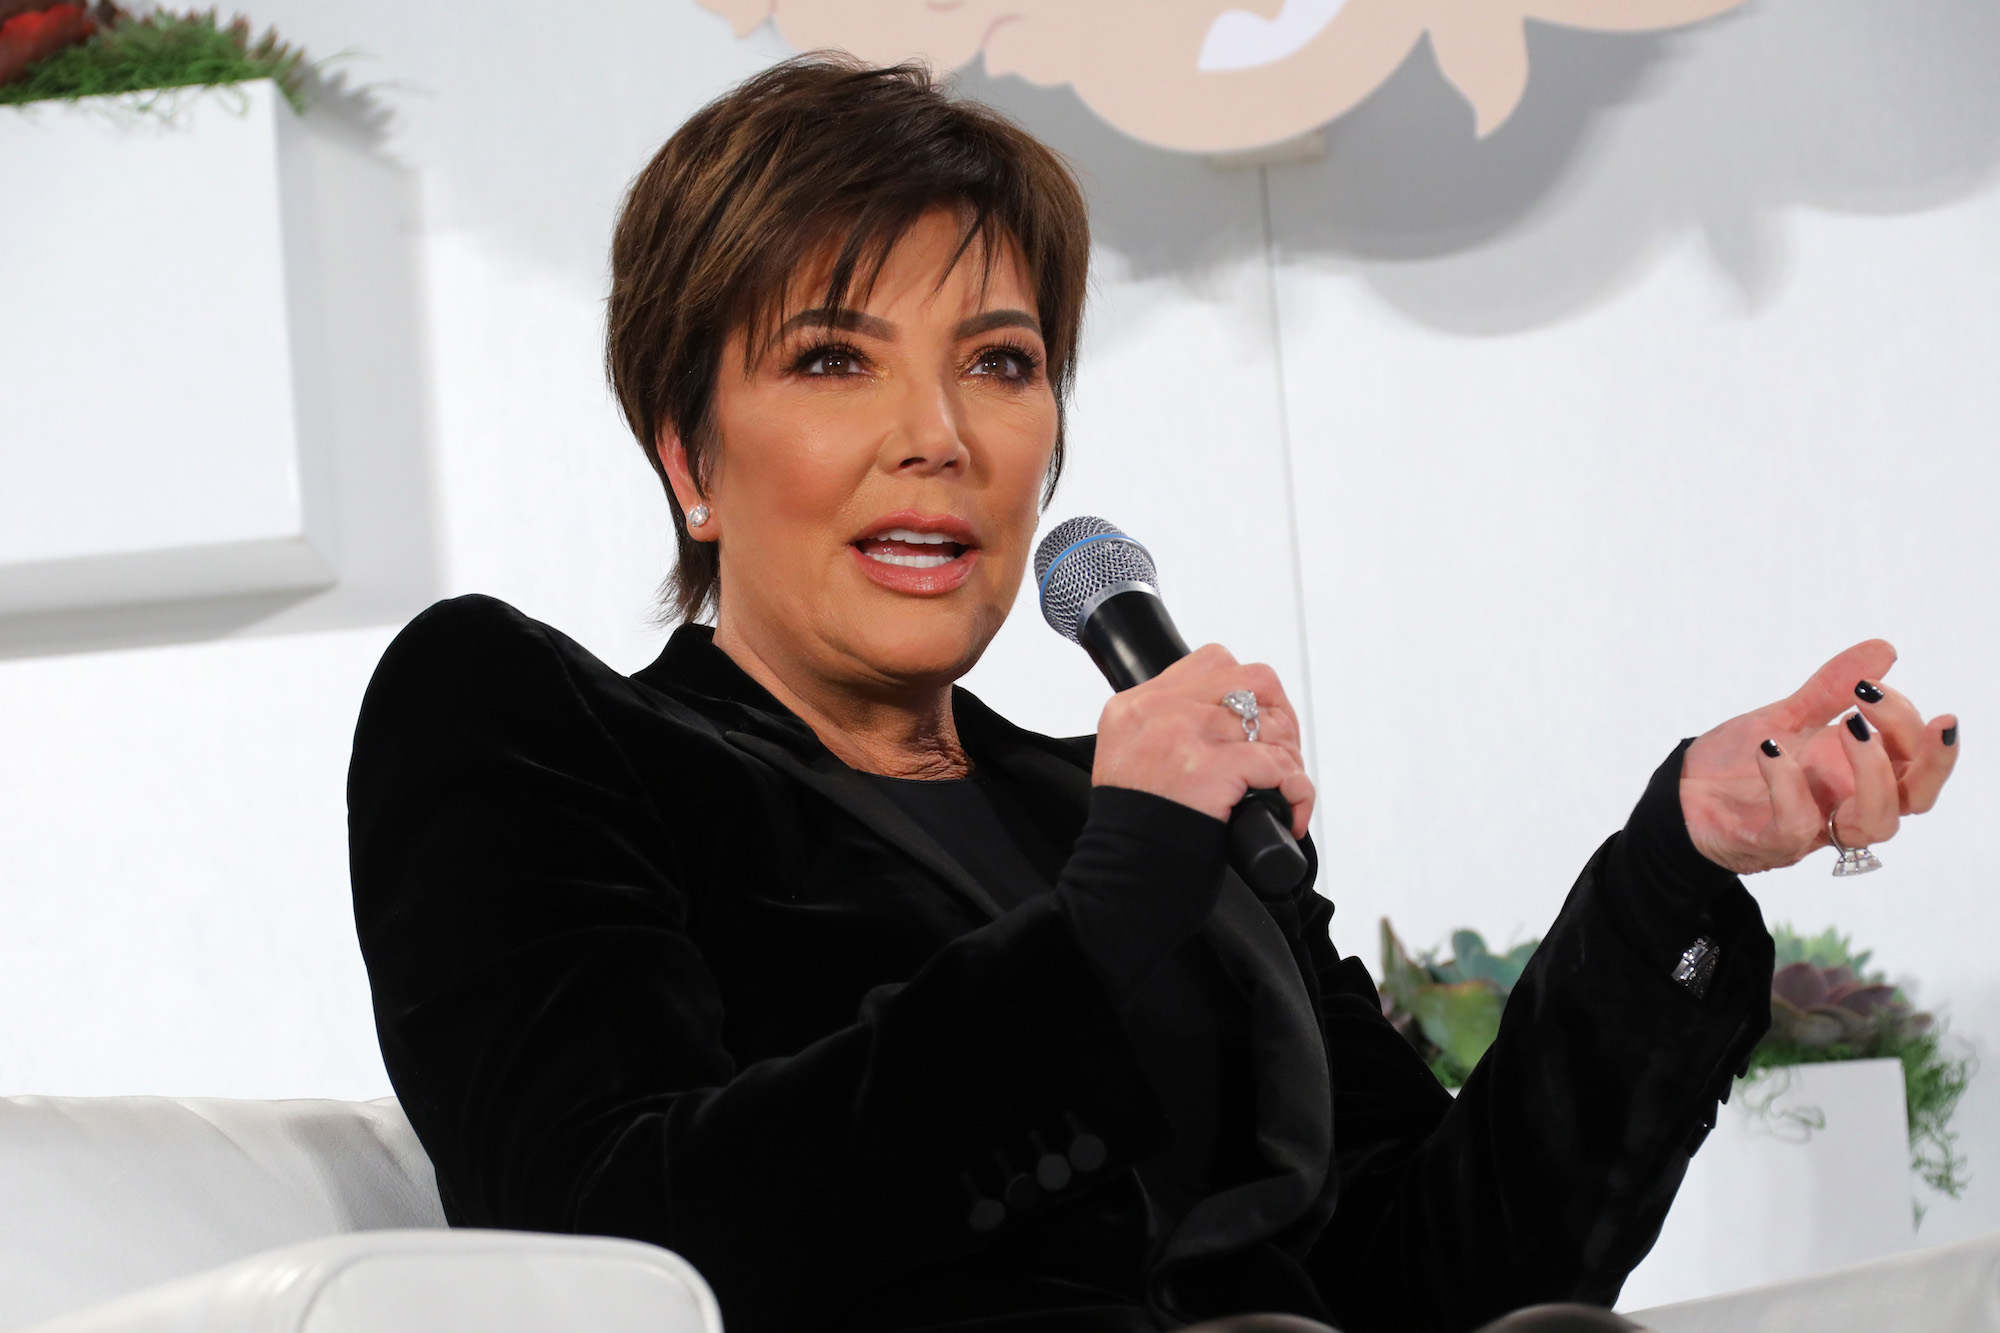 Kris Jenner talking into a microphone